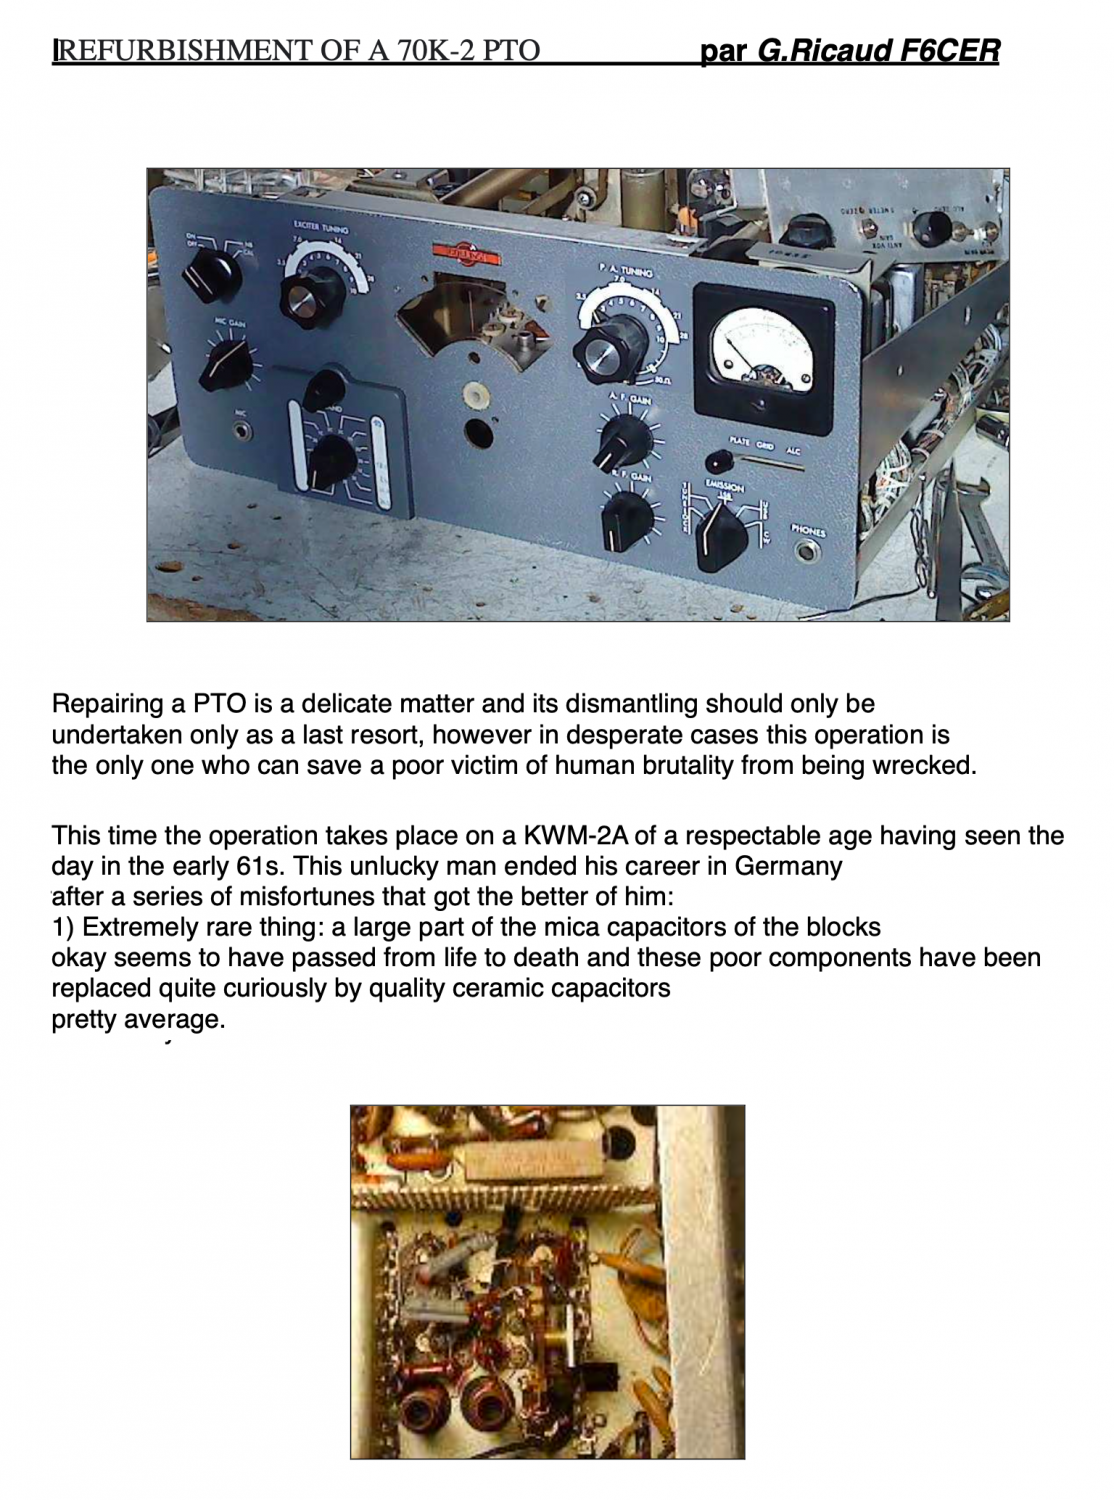 Collins KWM-2 Transceiver - Overhaul of a PTO 70K-2 - G. Ricaud F6CER (English Conversion by MD0MDI)